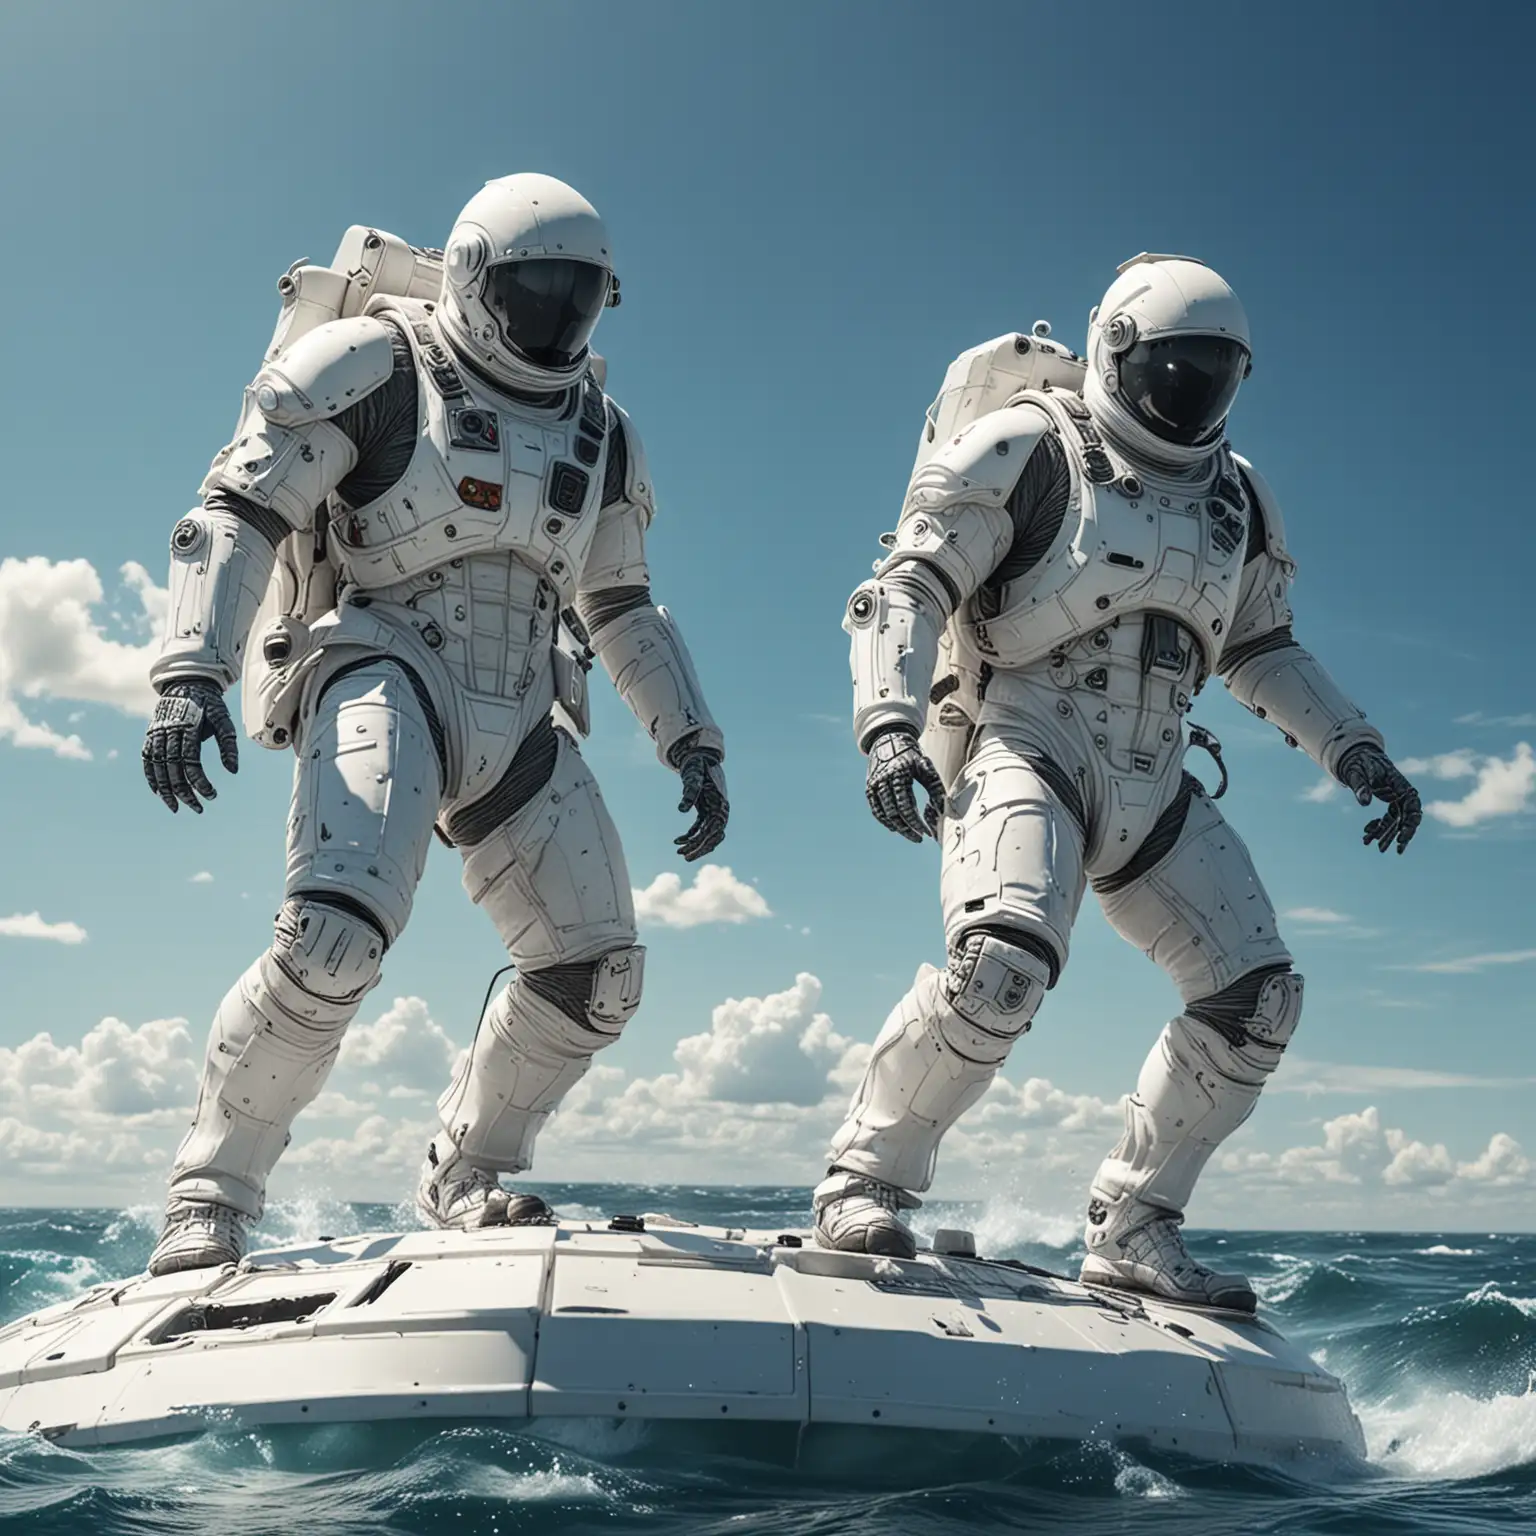 Hyperrealistic. Close-up. two sci-fi space soldiers in white suits float on a space raft  in on the ocean.  They stand in dynamic poses as if they were surfing. The background is blue sky. Dynamic image. Fun atmosphere.